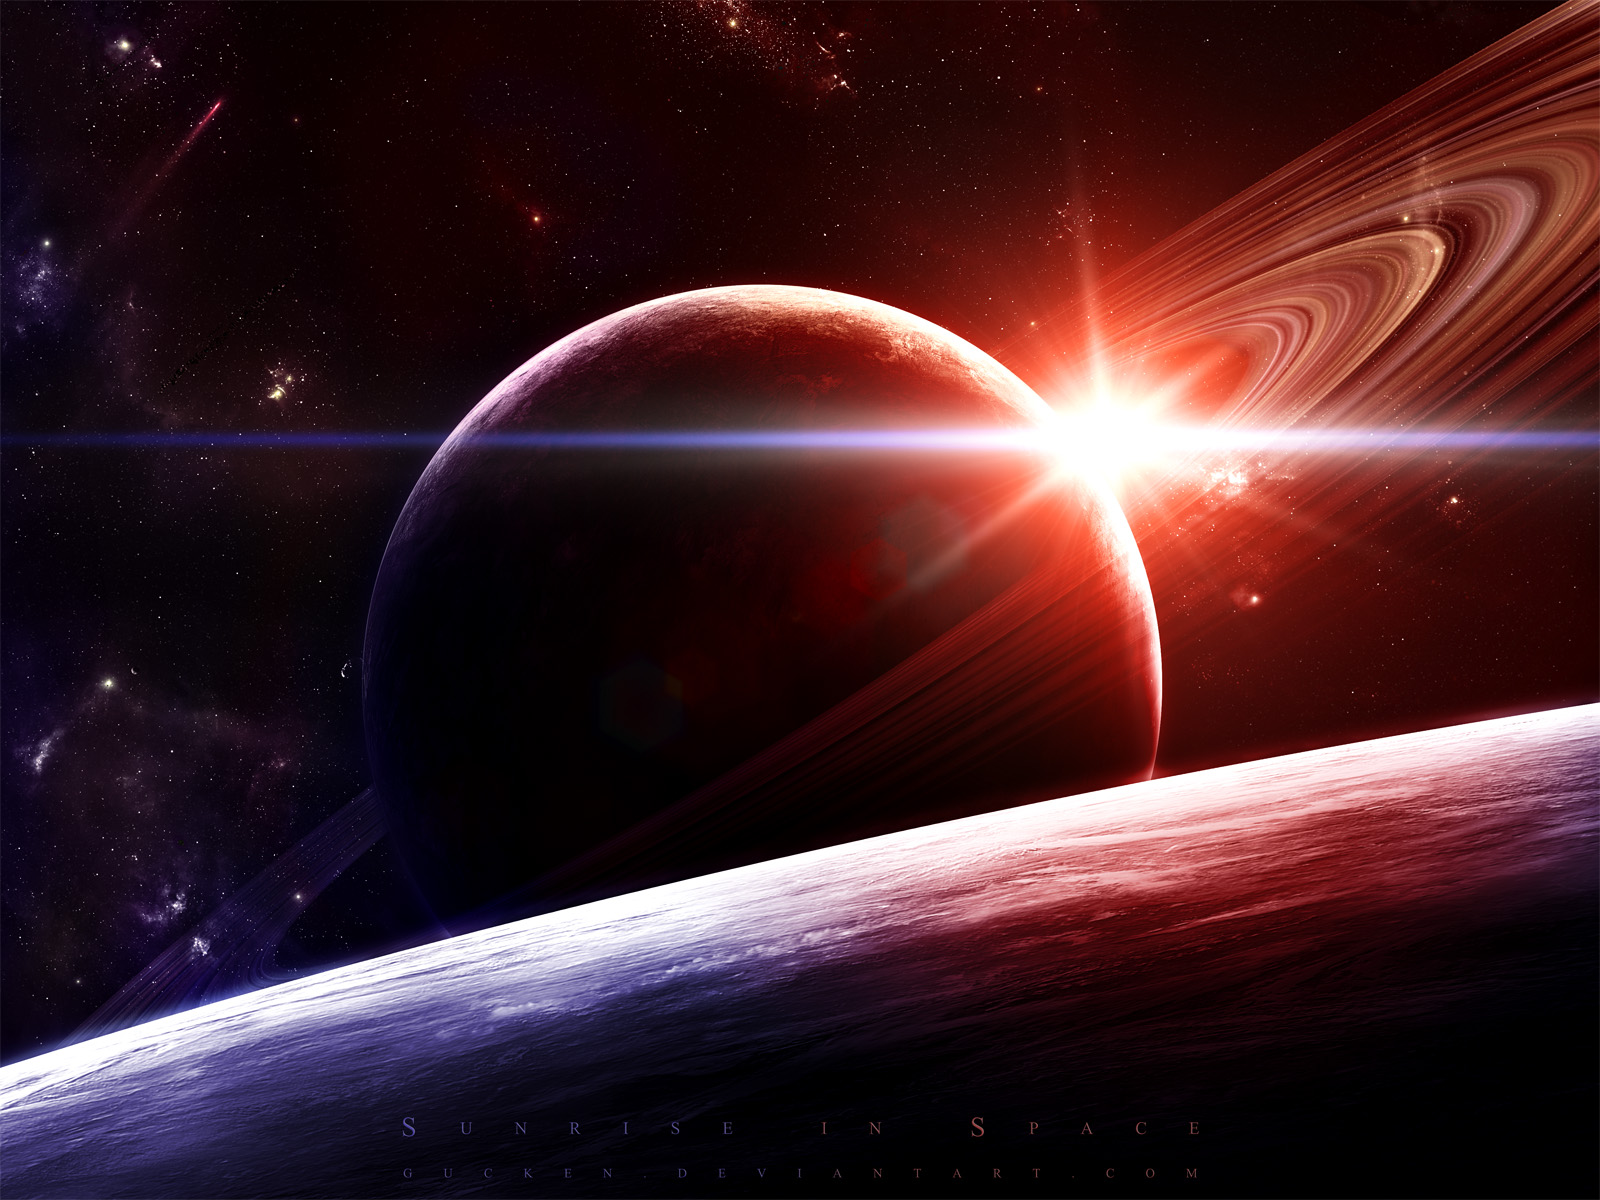 Sunrise in Space Wallpaper - High Definition, High Resolution HD Wallpapers  : High Definition, High Resolution HD Wallpapers